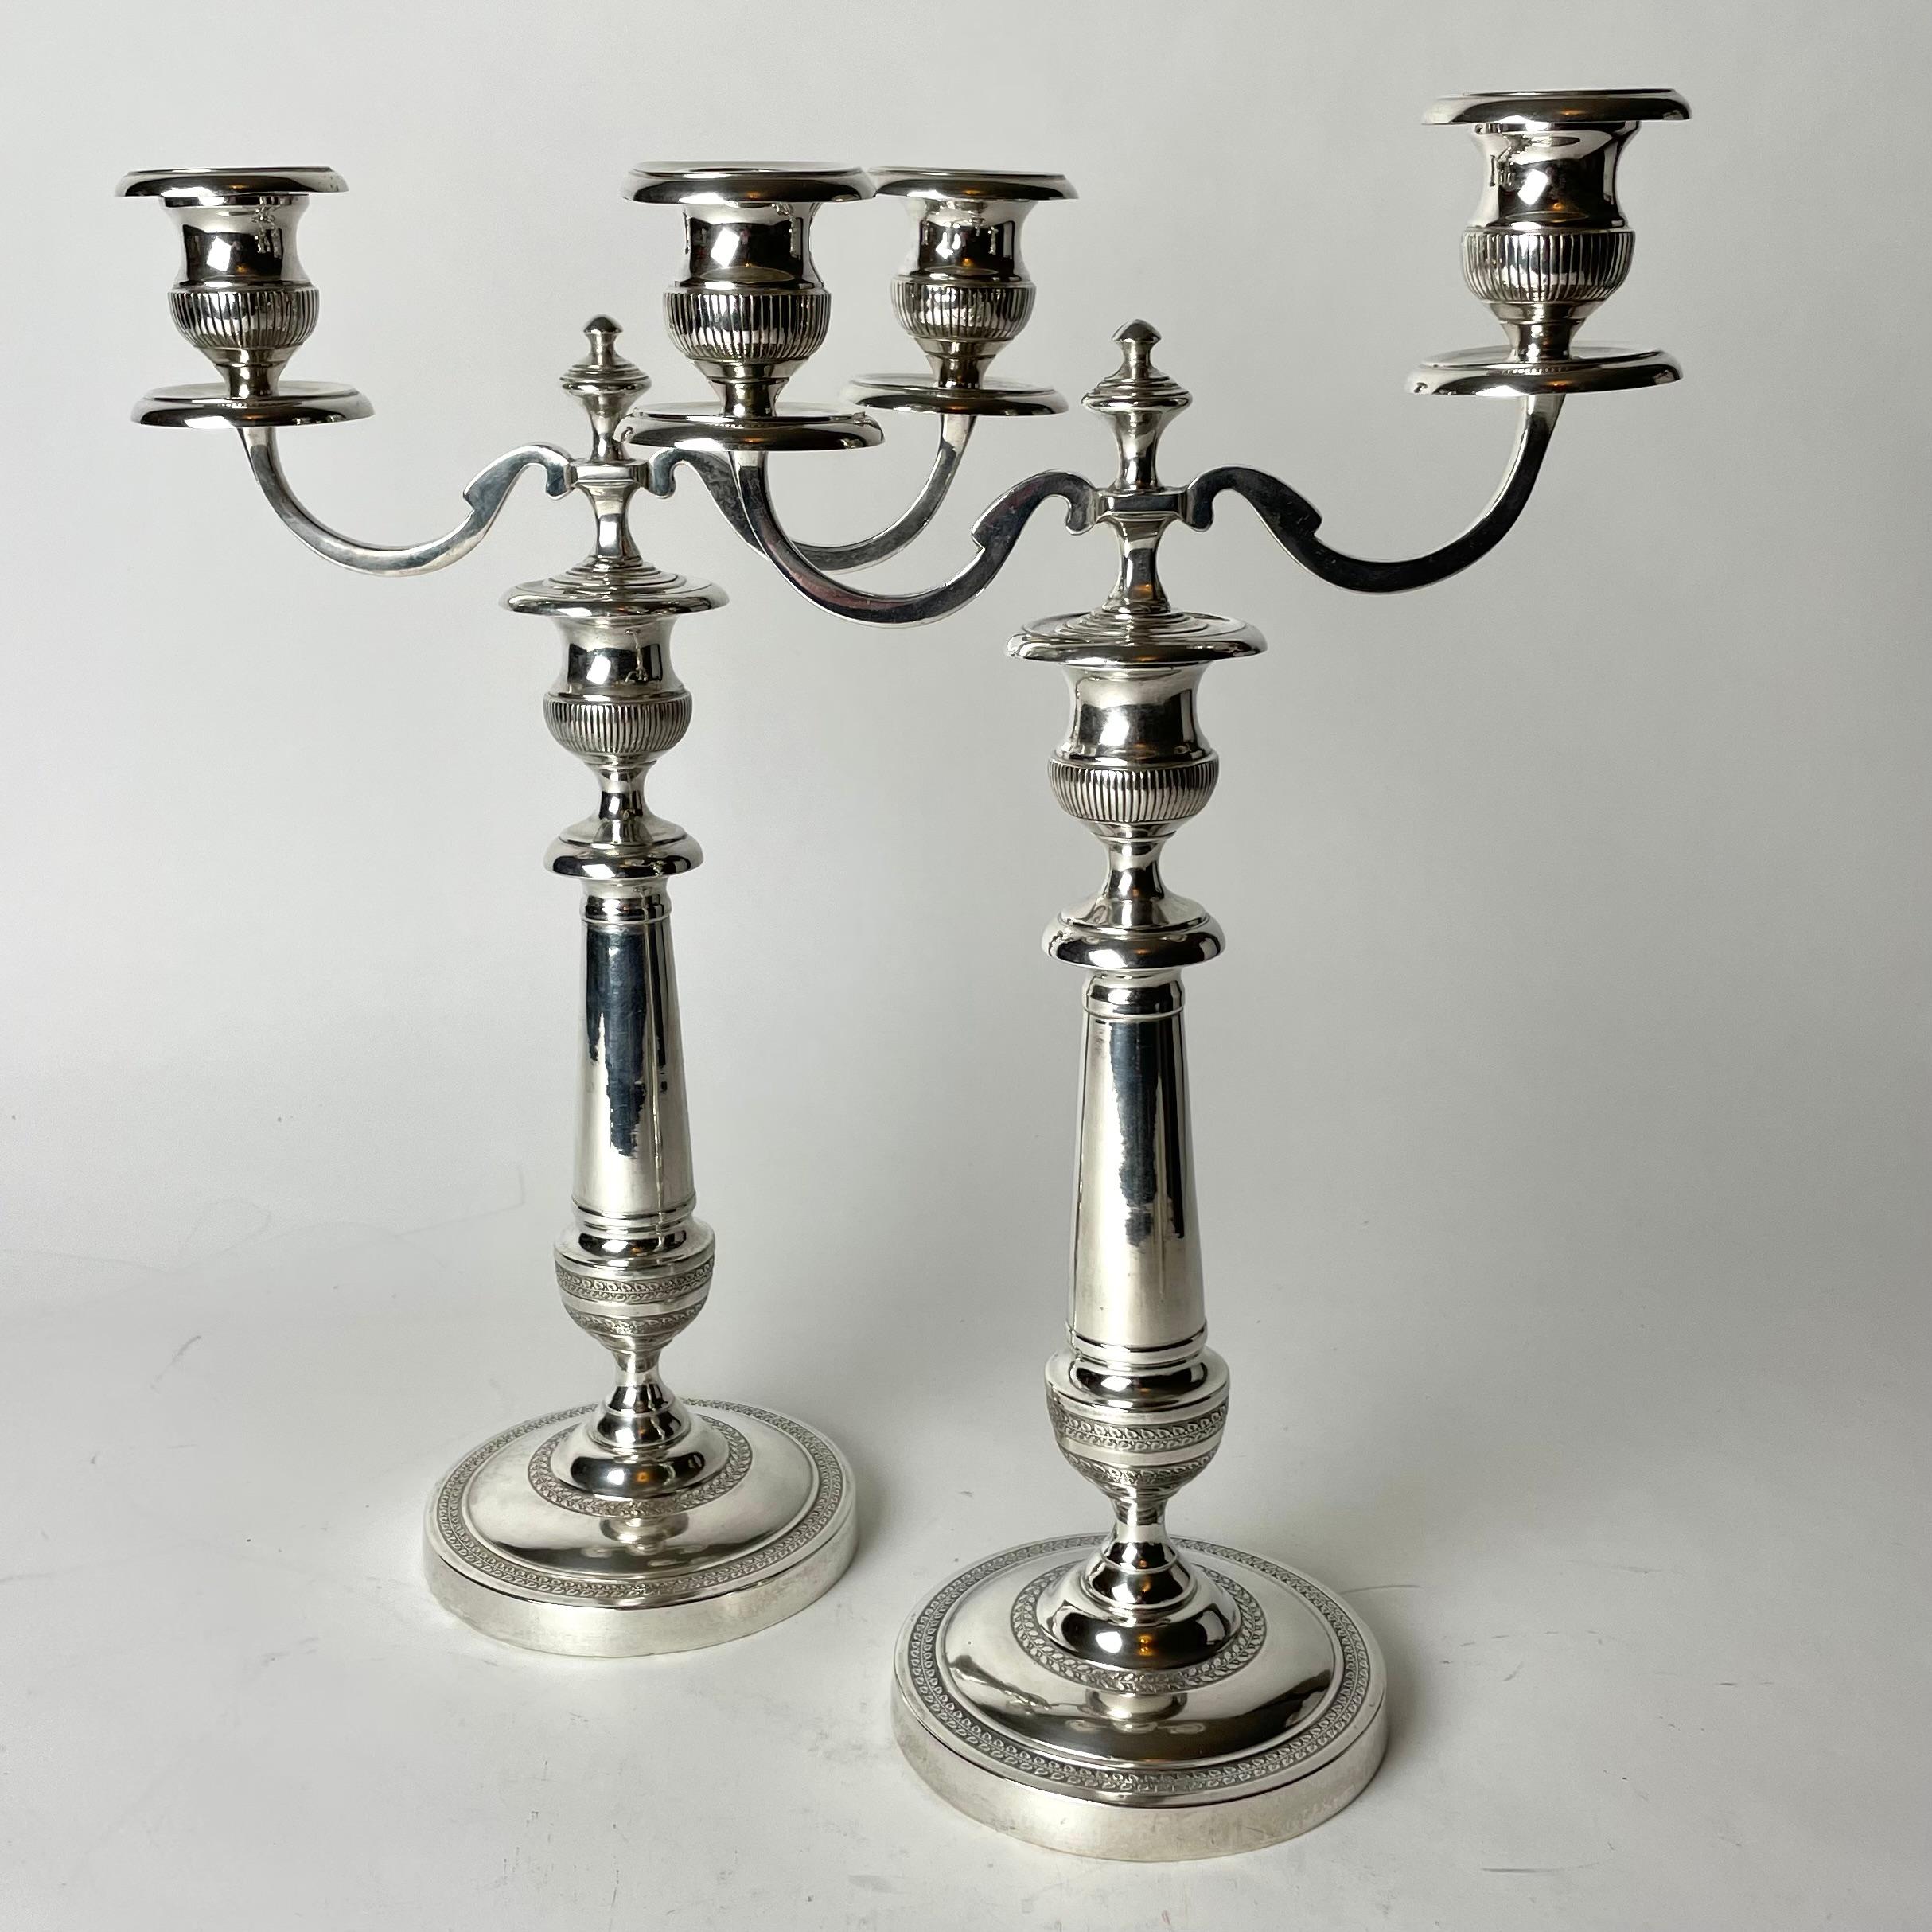 Karl Johan A pair of beautiful silver-plated Candelabras. Swedish Empire from the 1820s For Sale